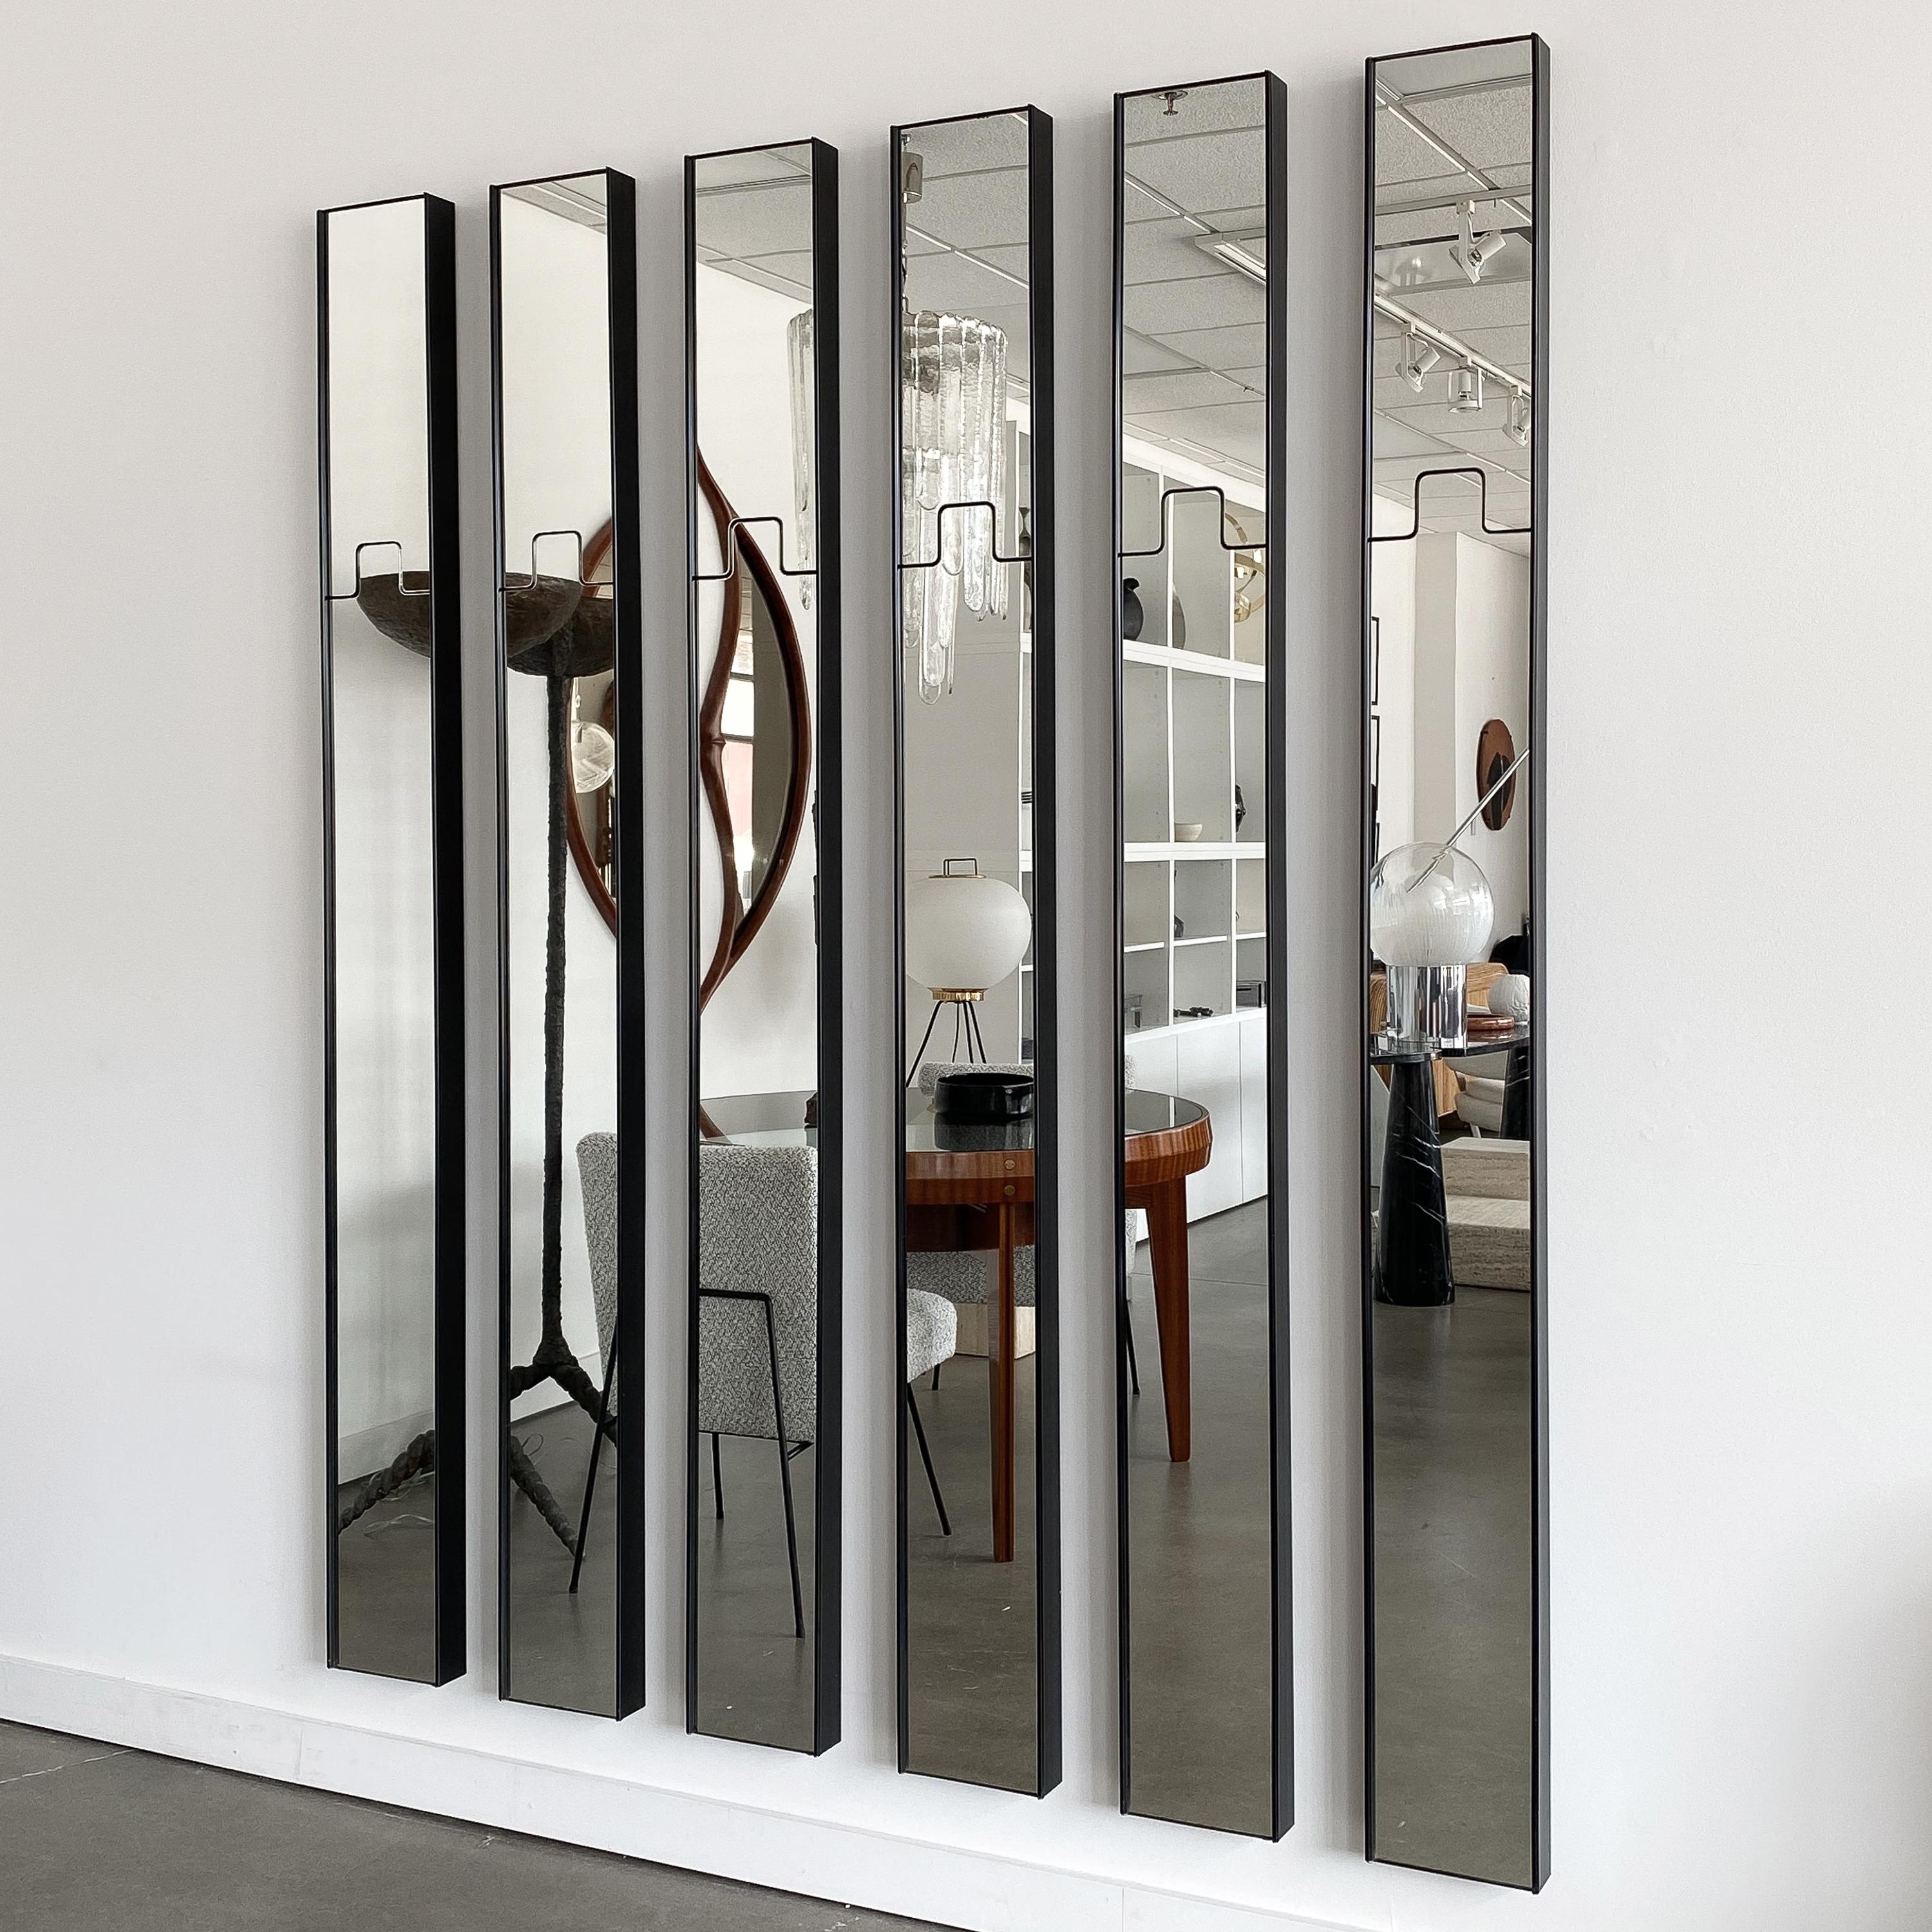 Set of 6 modular Gronda wall mirrors with integrated coat rack by Luciano Bertoncini for Elco, circa 1970s. Each clear glass mirror is framed in black plastic and measures 79